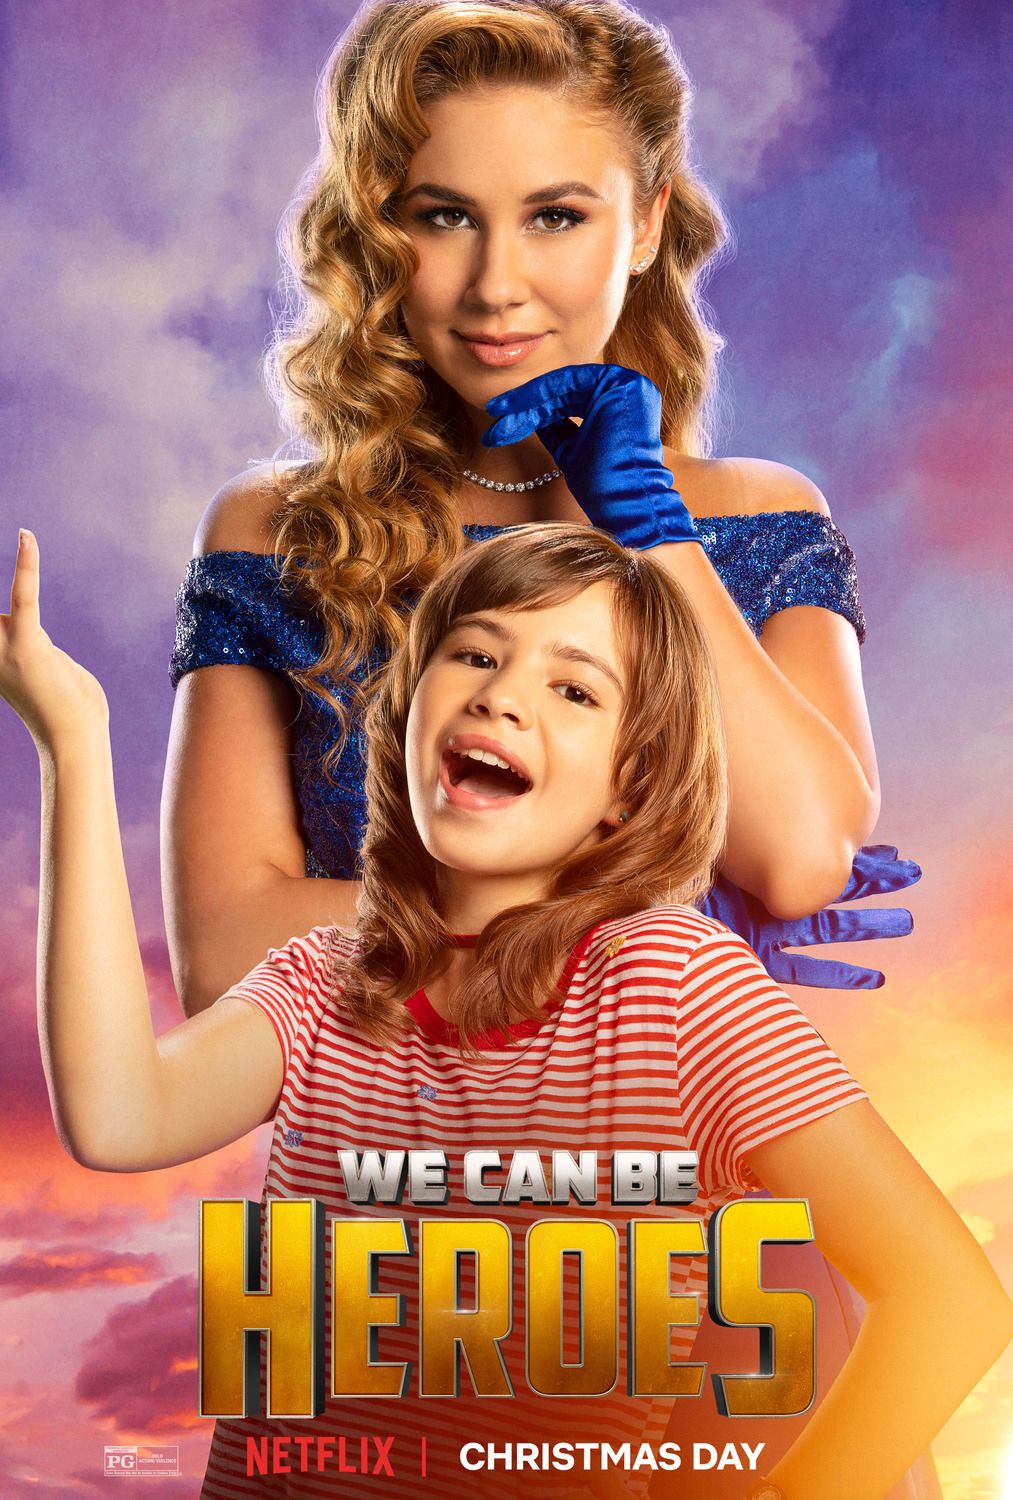 We Can Be Heroes Character Poster #7